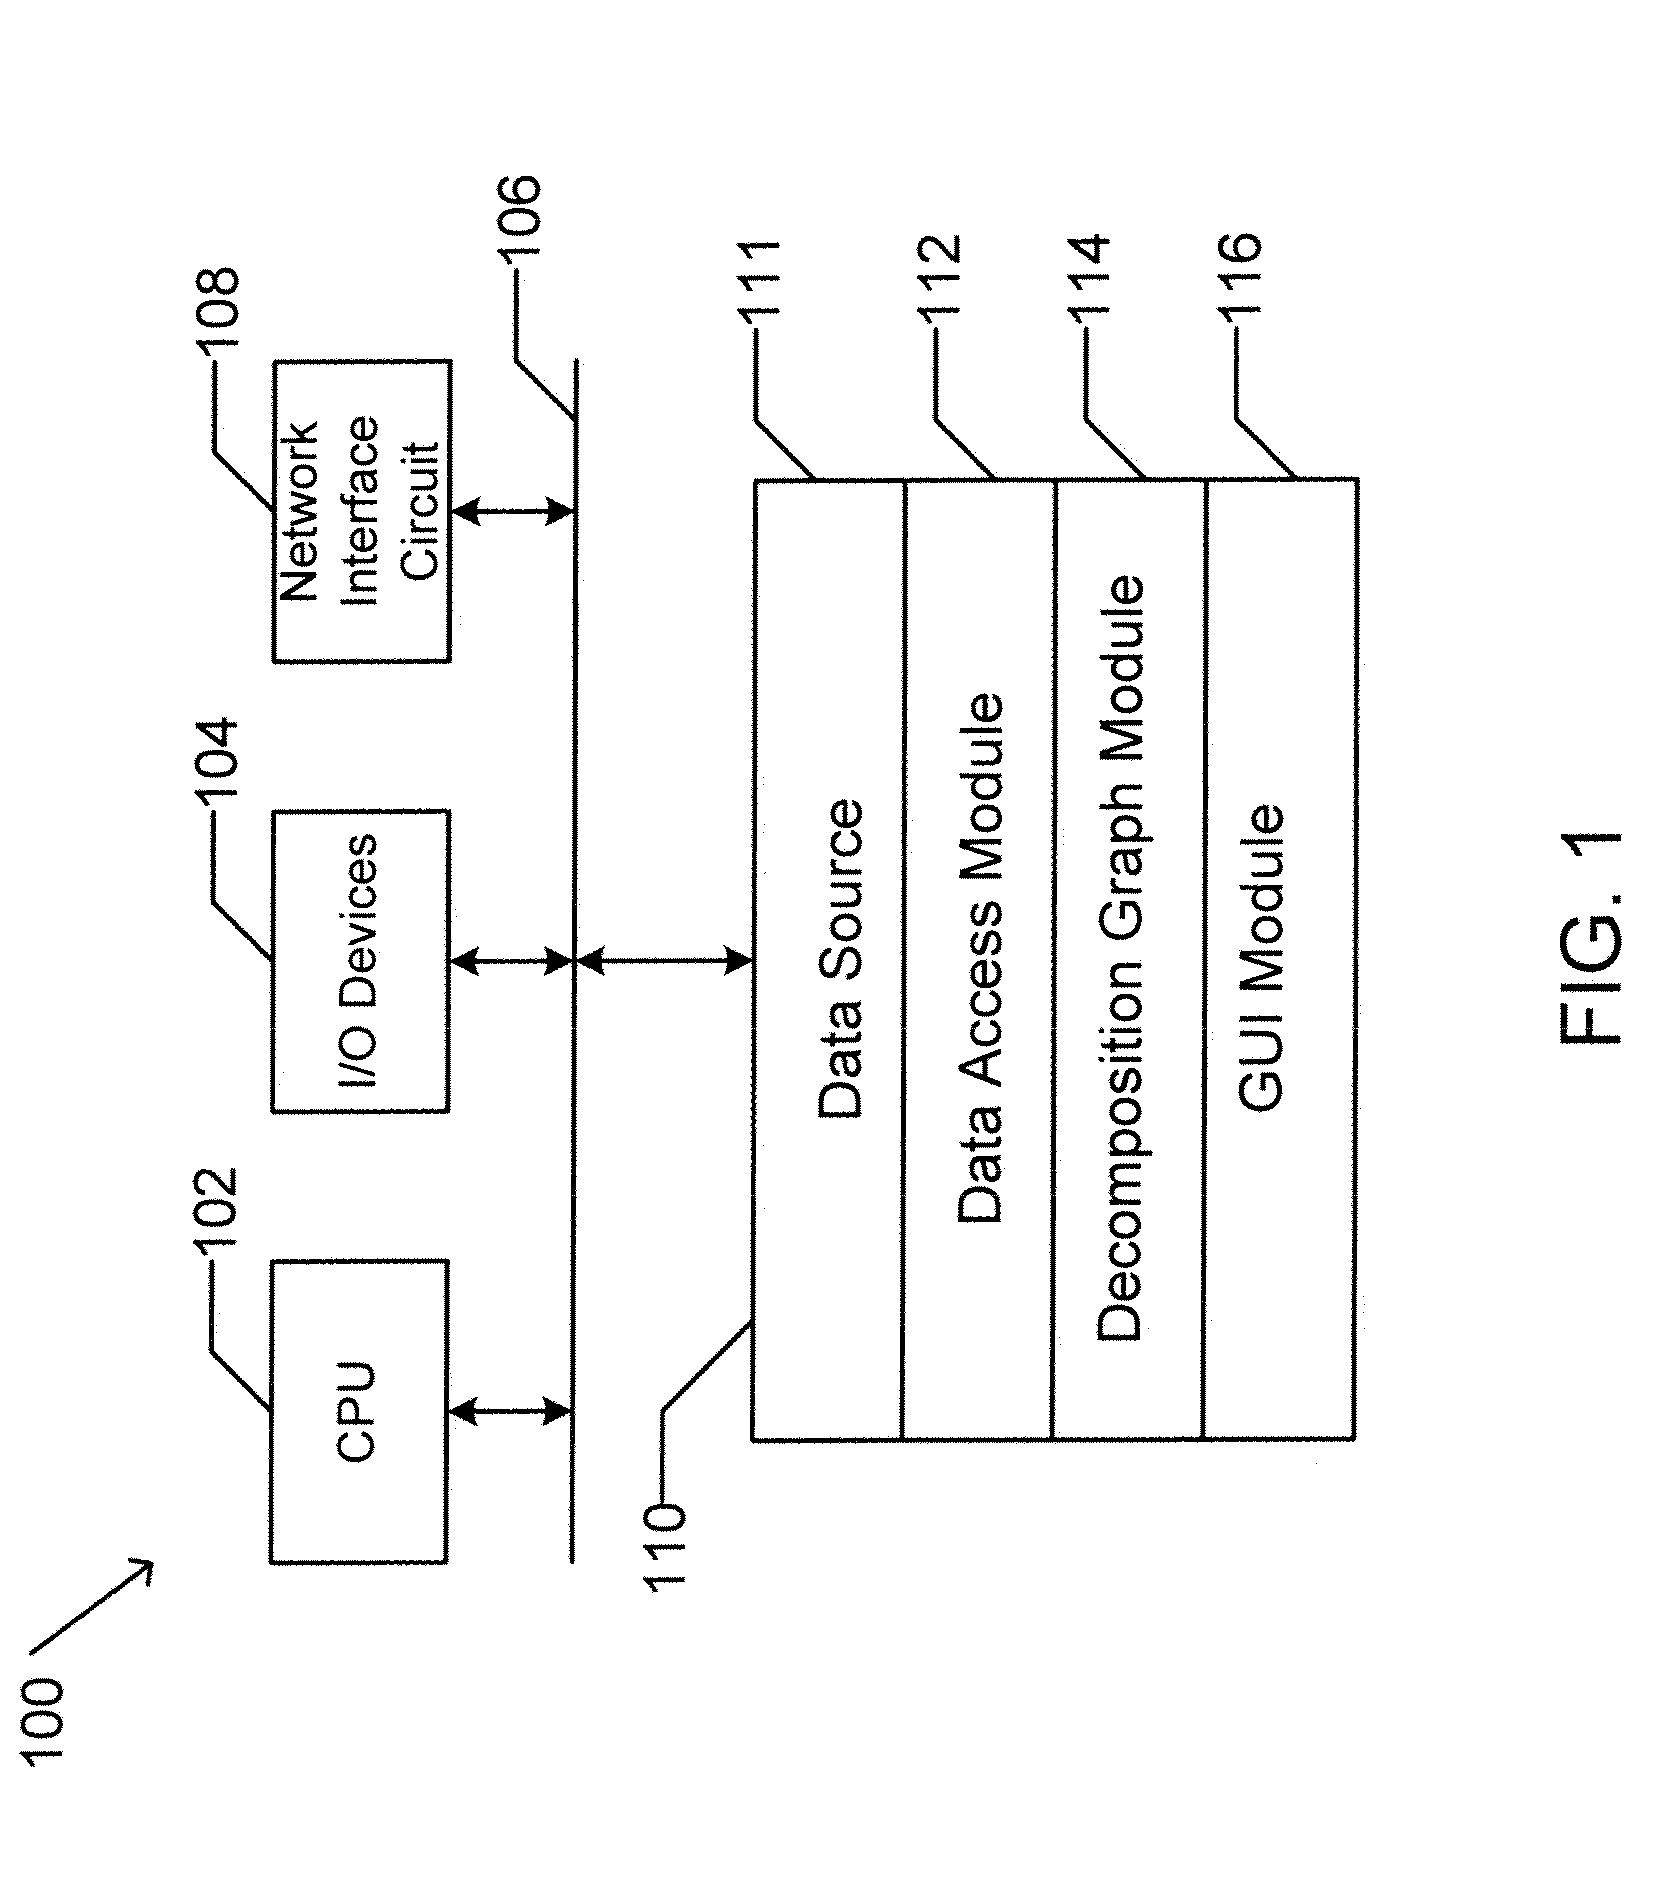 Apparatus and method for visualizing data within a decomposition graph